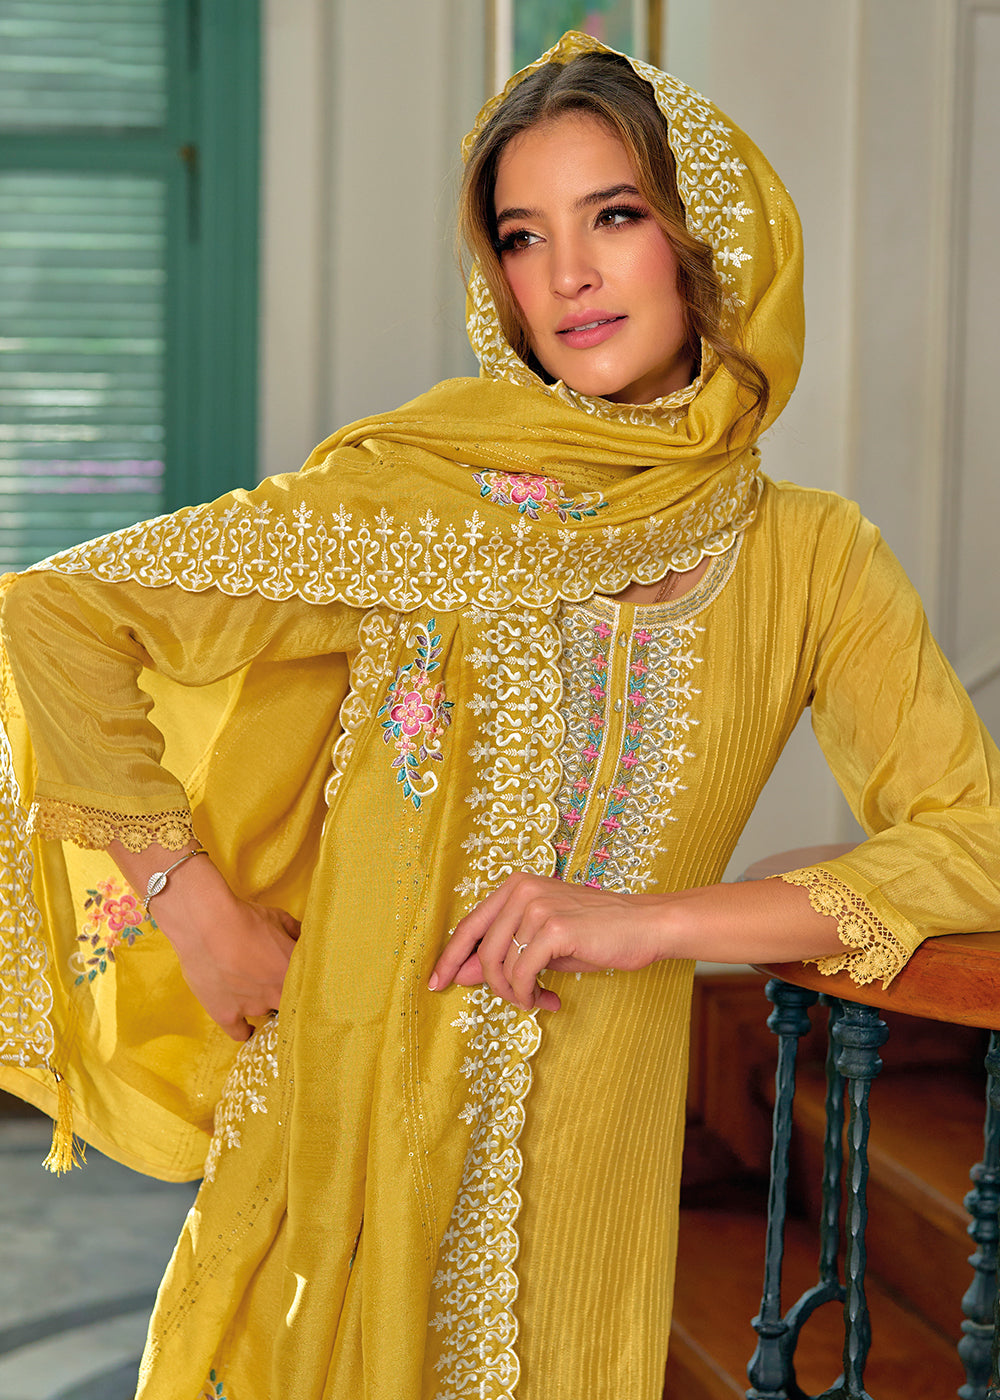 Buy Now Exquisite Yellow Premium Silk Festive Wear Salwar Suit Online in USA, UK, Canada, Germany, Australia & Worldwide at Empress Clothing.